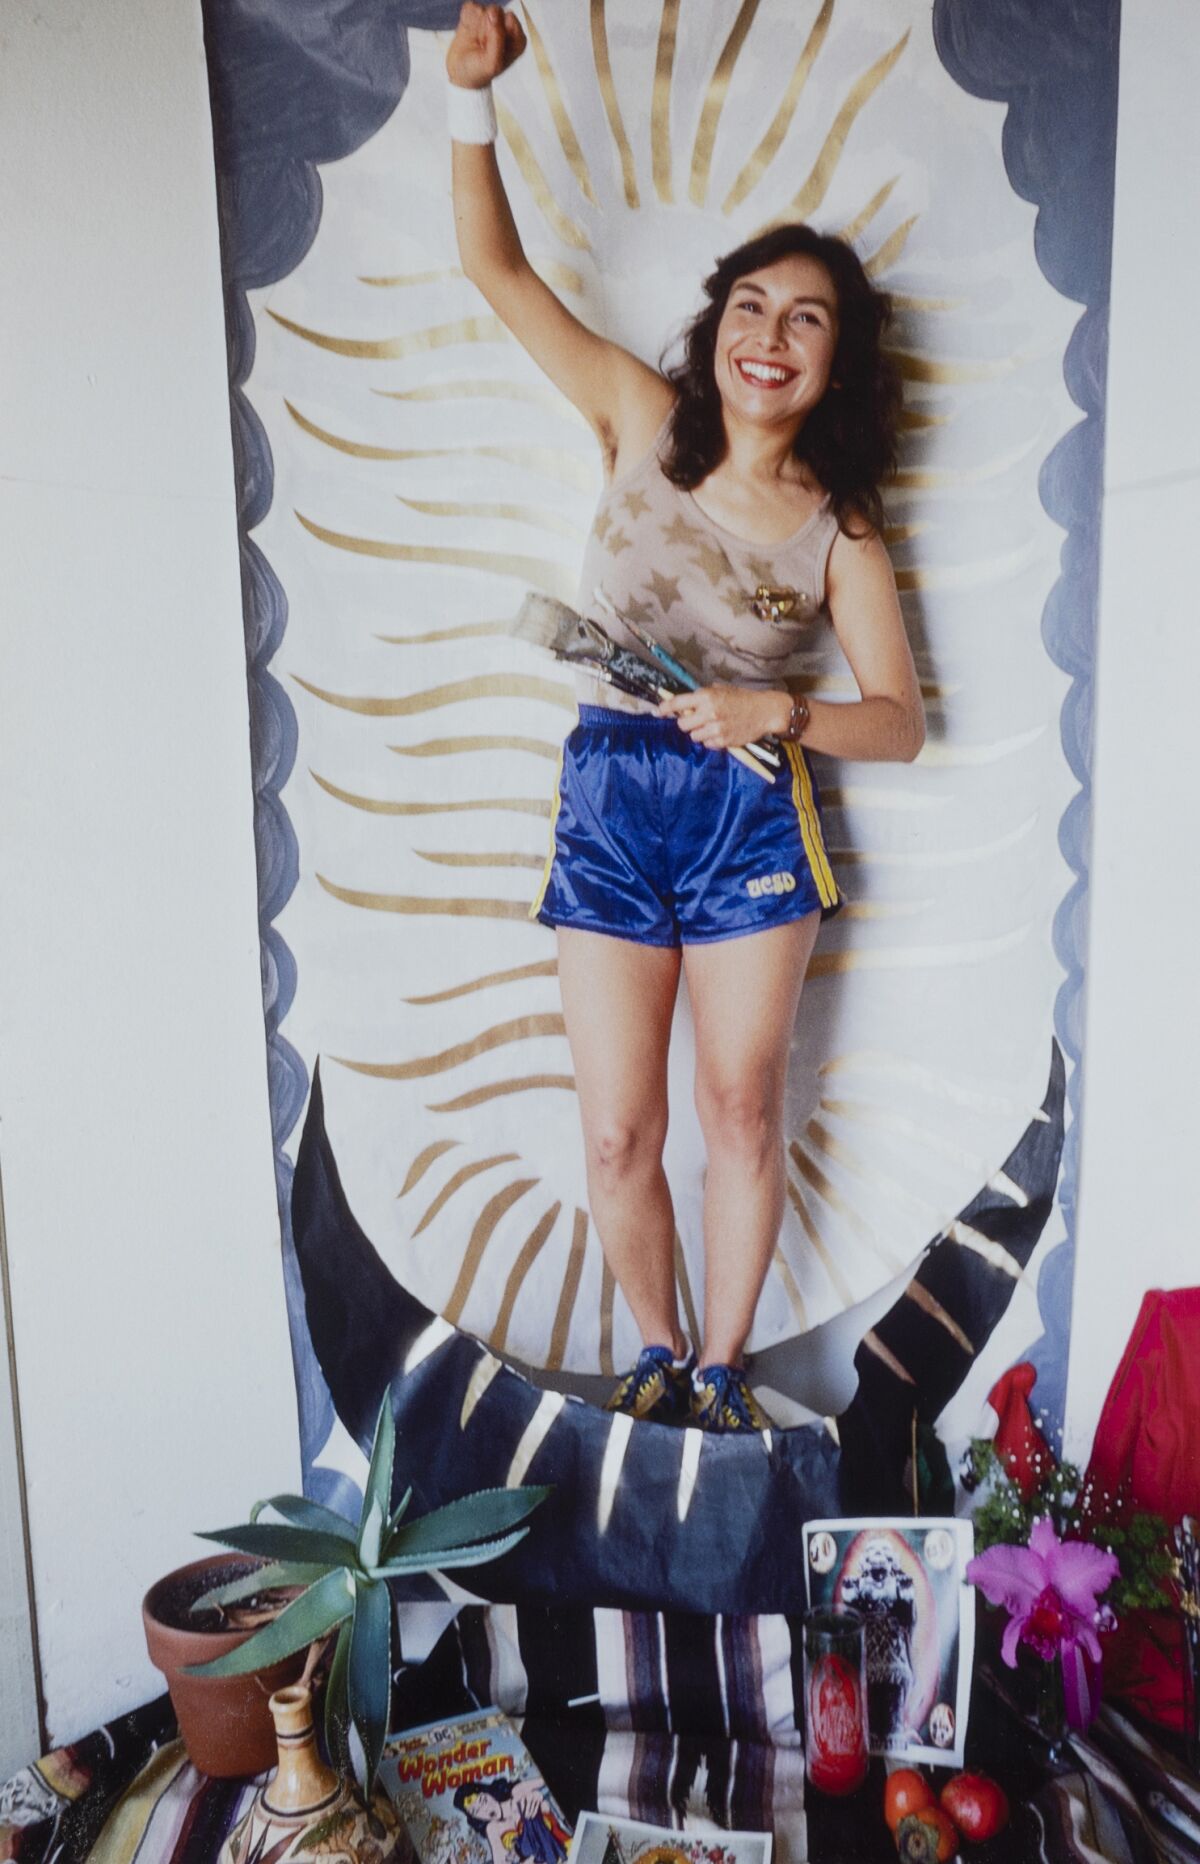 A woman  in running shorts and holding paintbrushes stands before a backdrop typical of the Virgin of Guadalupe.